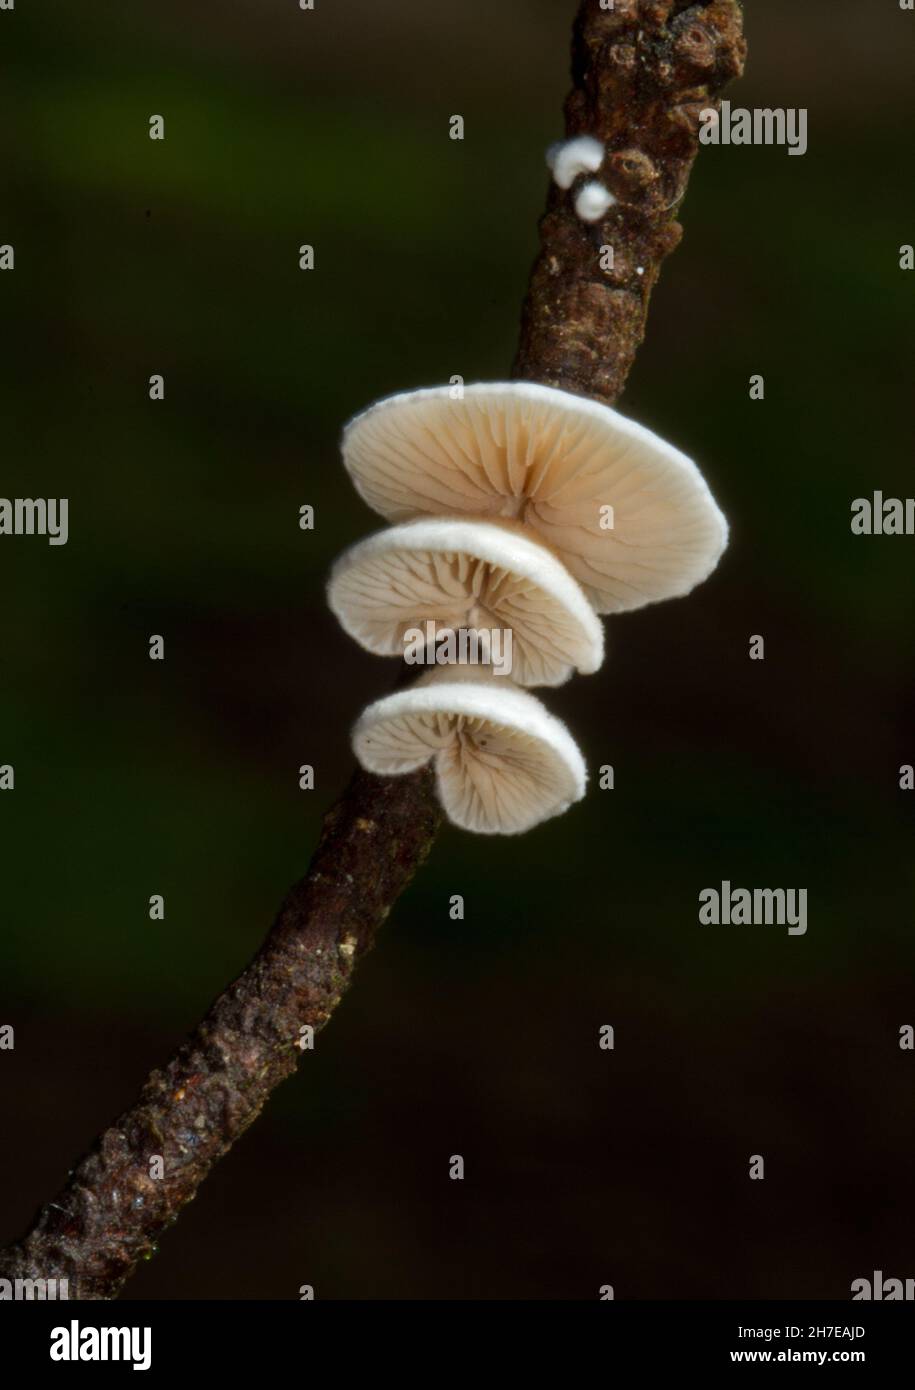 Tiny white mushrooms, Variable Oysterlings, Crepidotus variabilis, growing on a thin twig Stock Photo